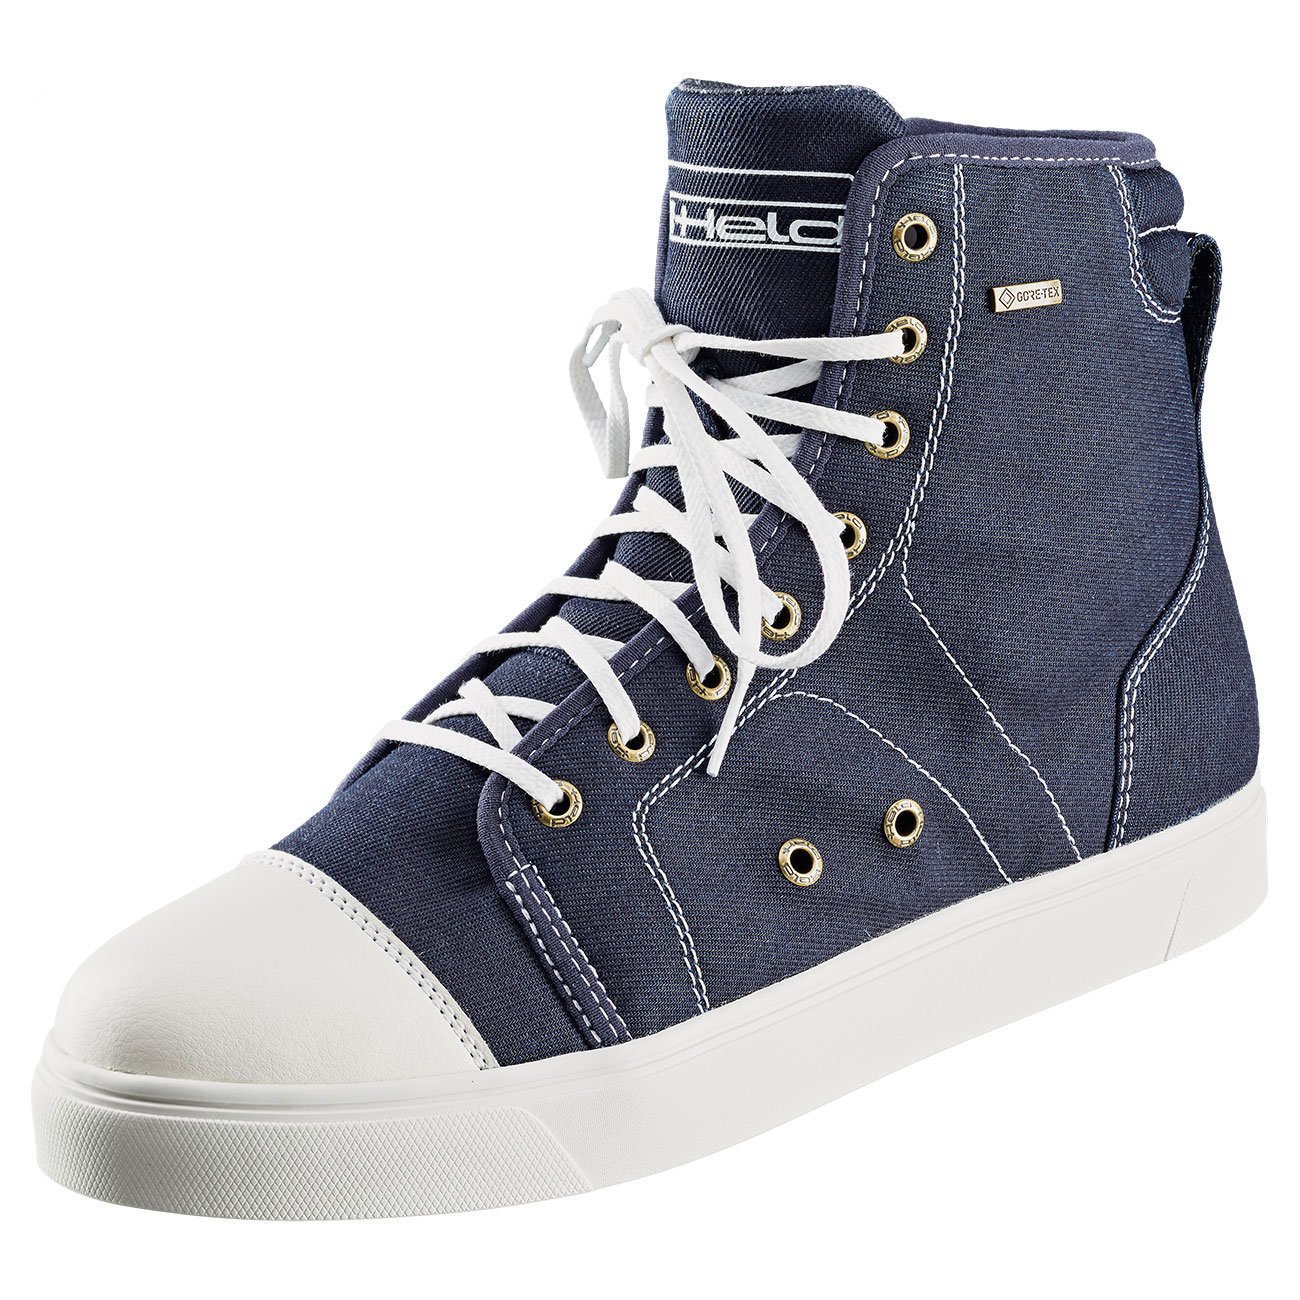 Image of Held College Rider GTX Bleu Chaussures Taille 40